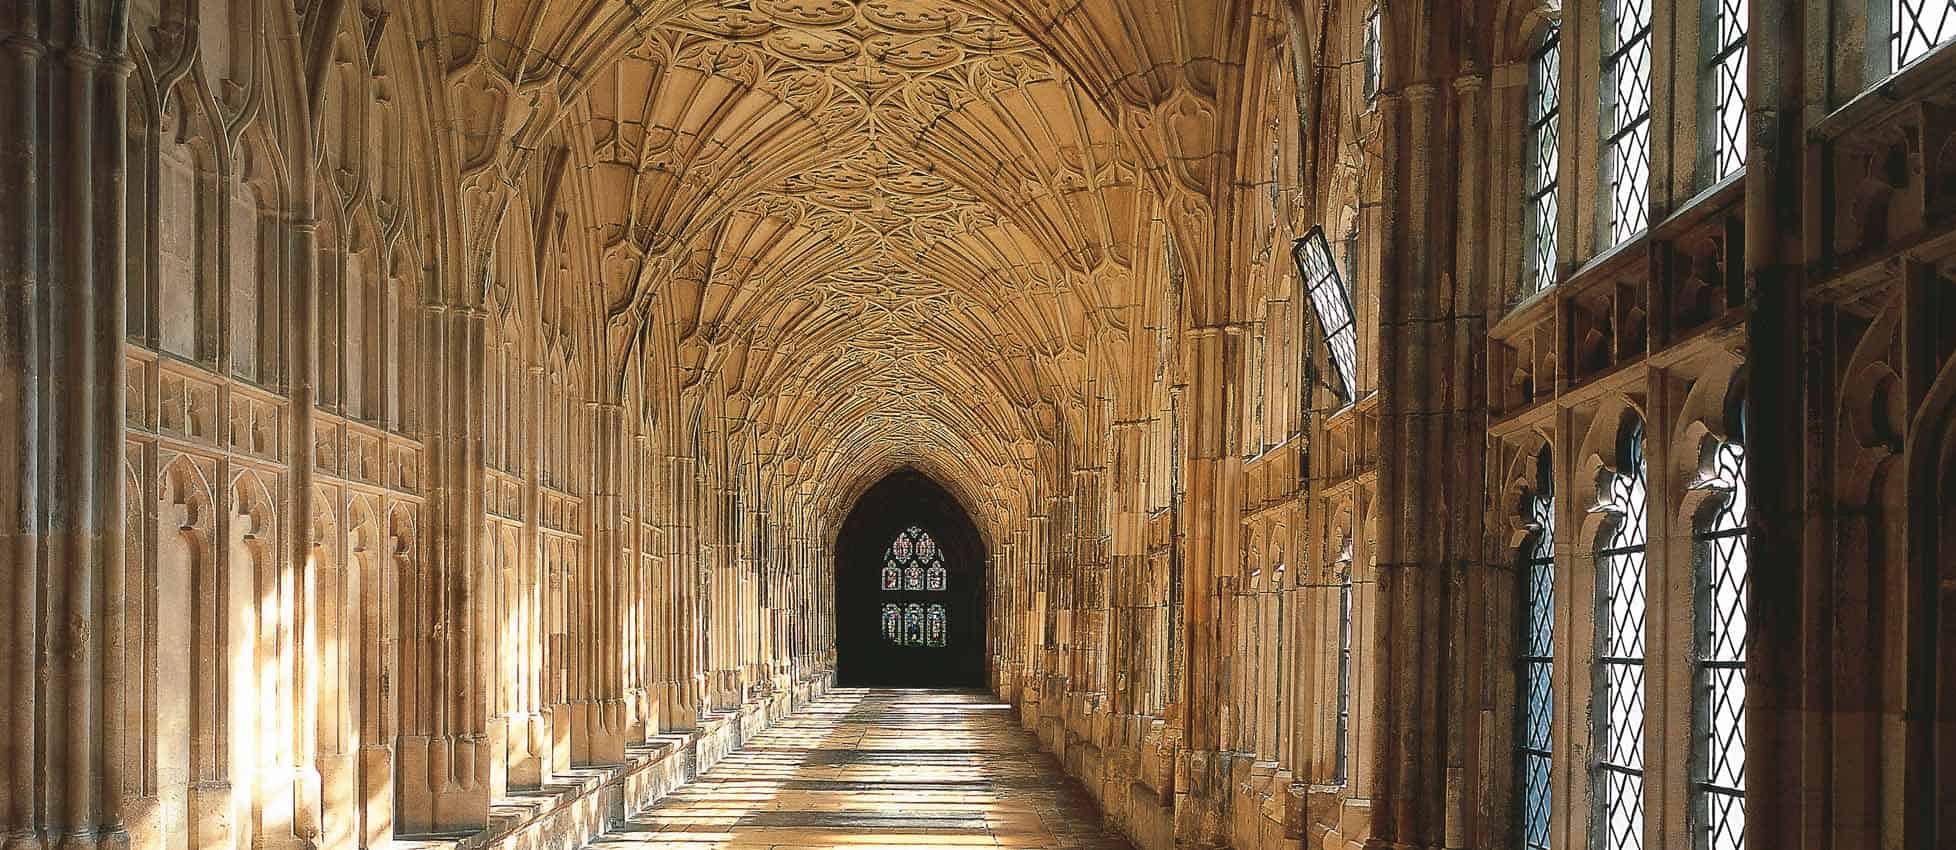 Gloucester Cathedral - The Association of English Cathedrals